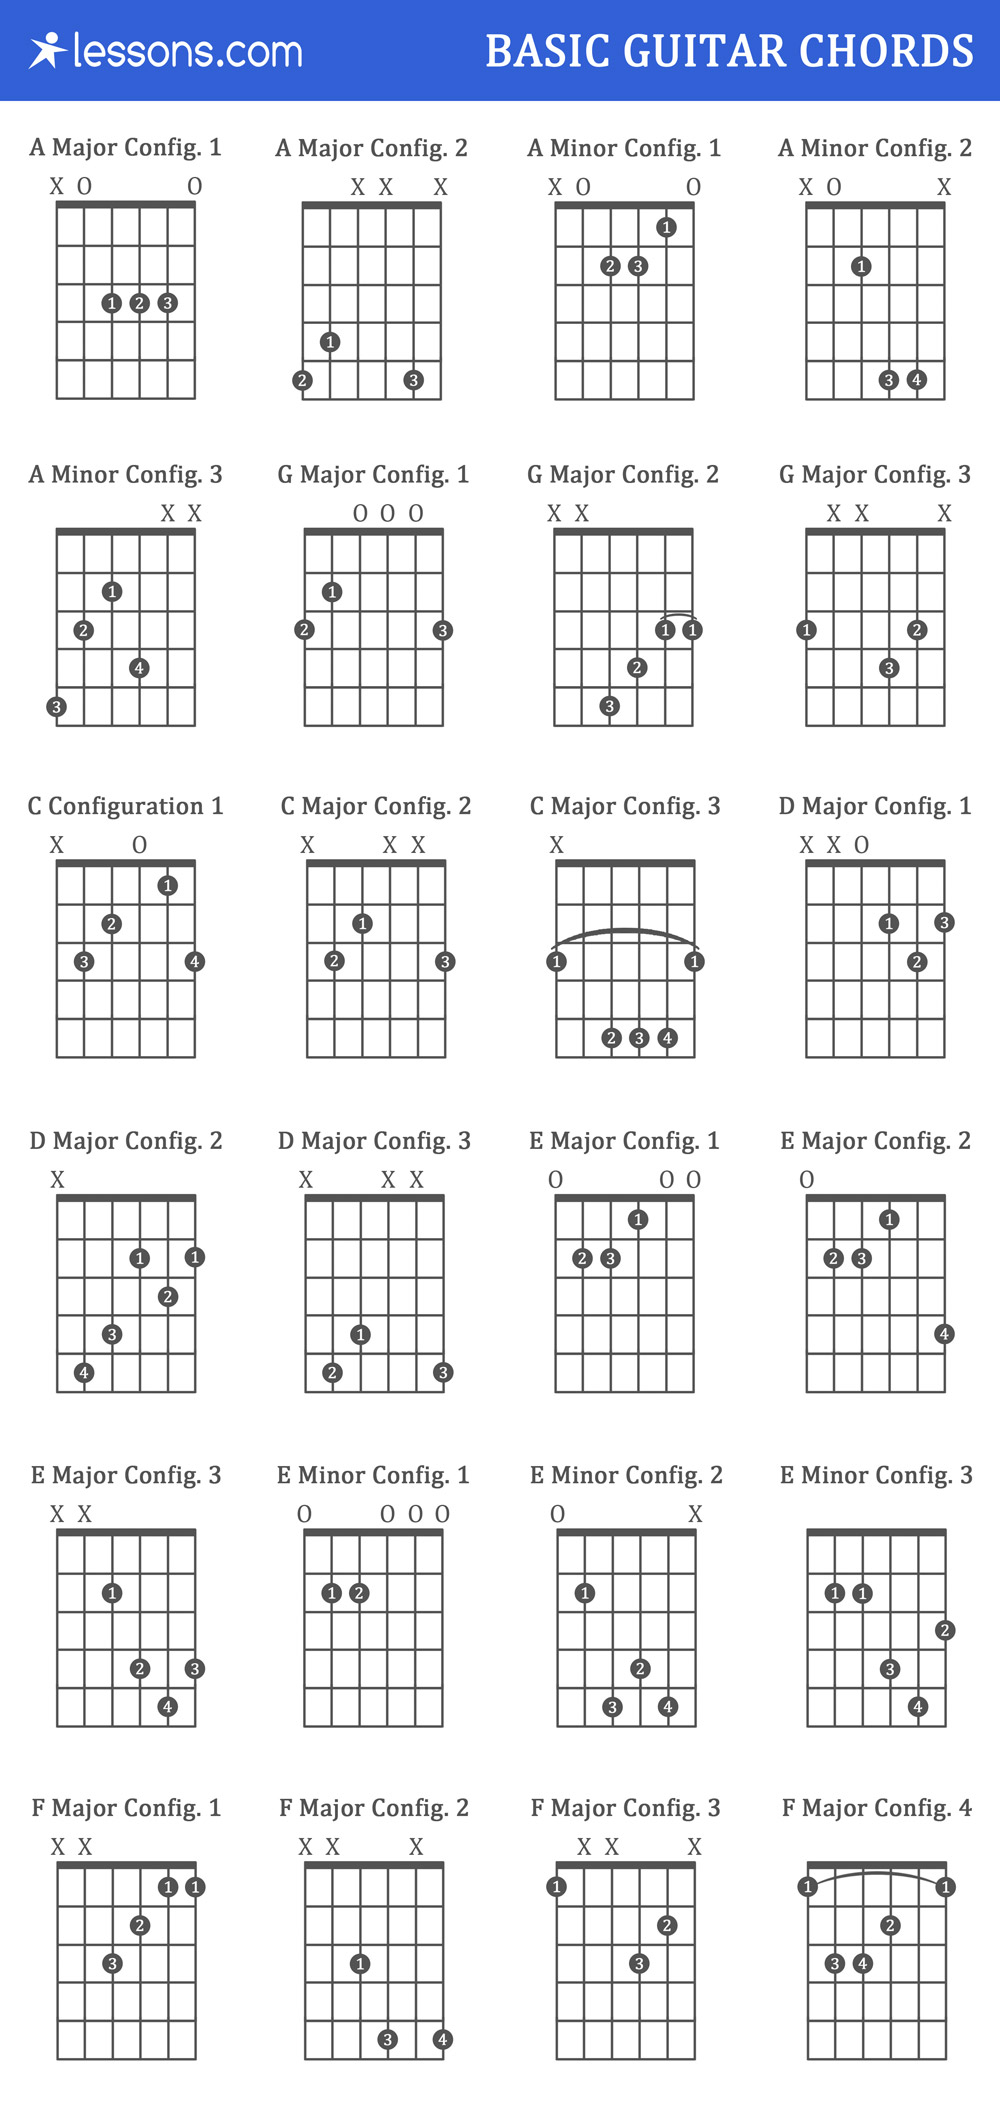 Basic Guitar Chords The 8 Basic Guitar Chords For Beginners With Charts Examples